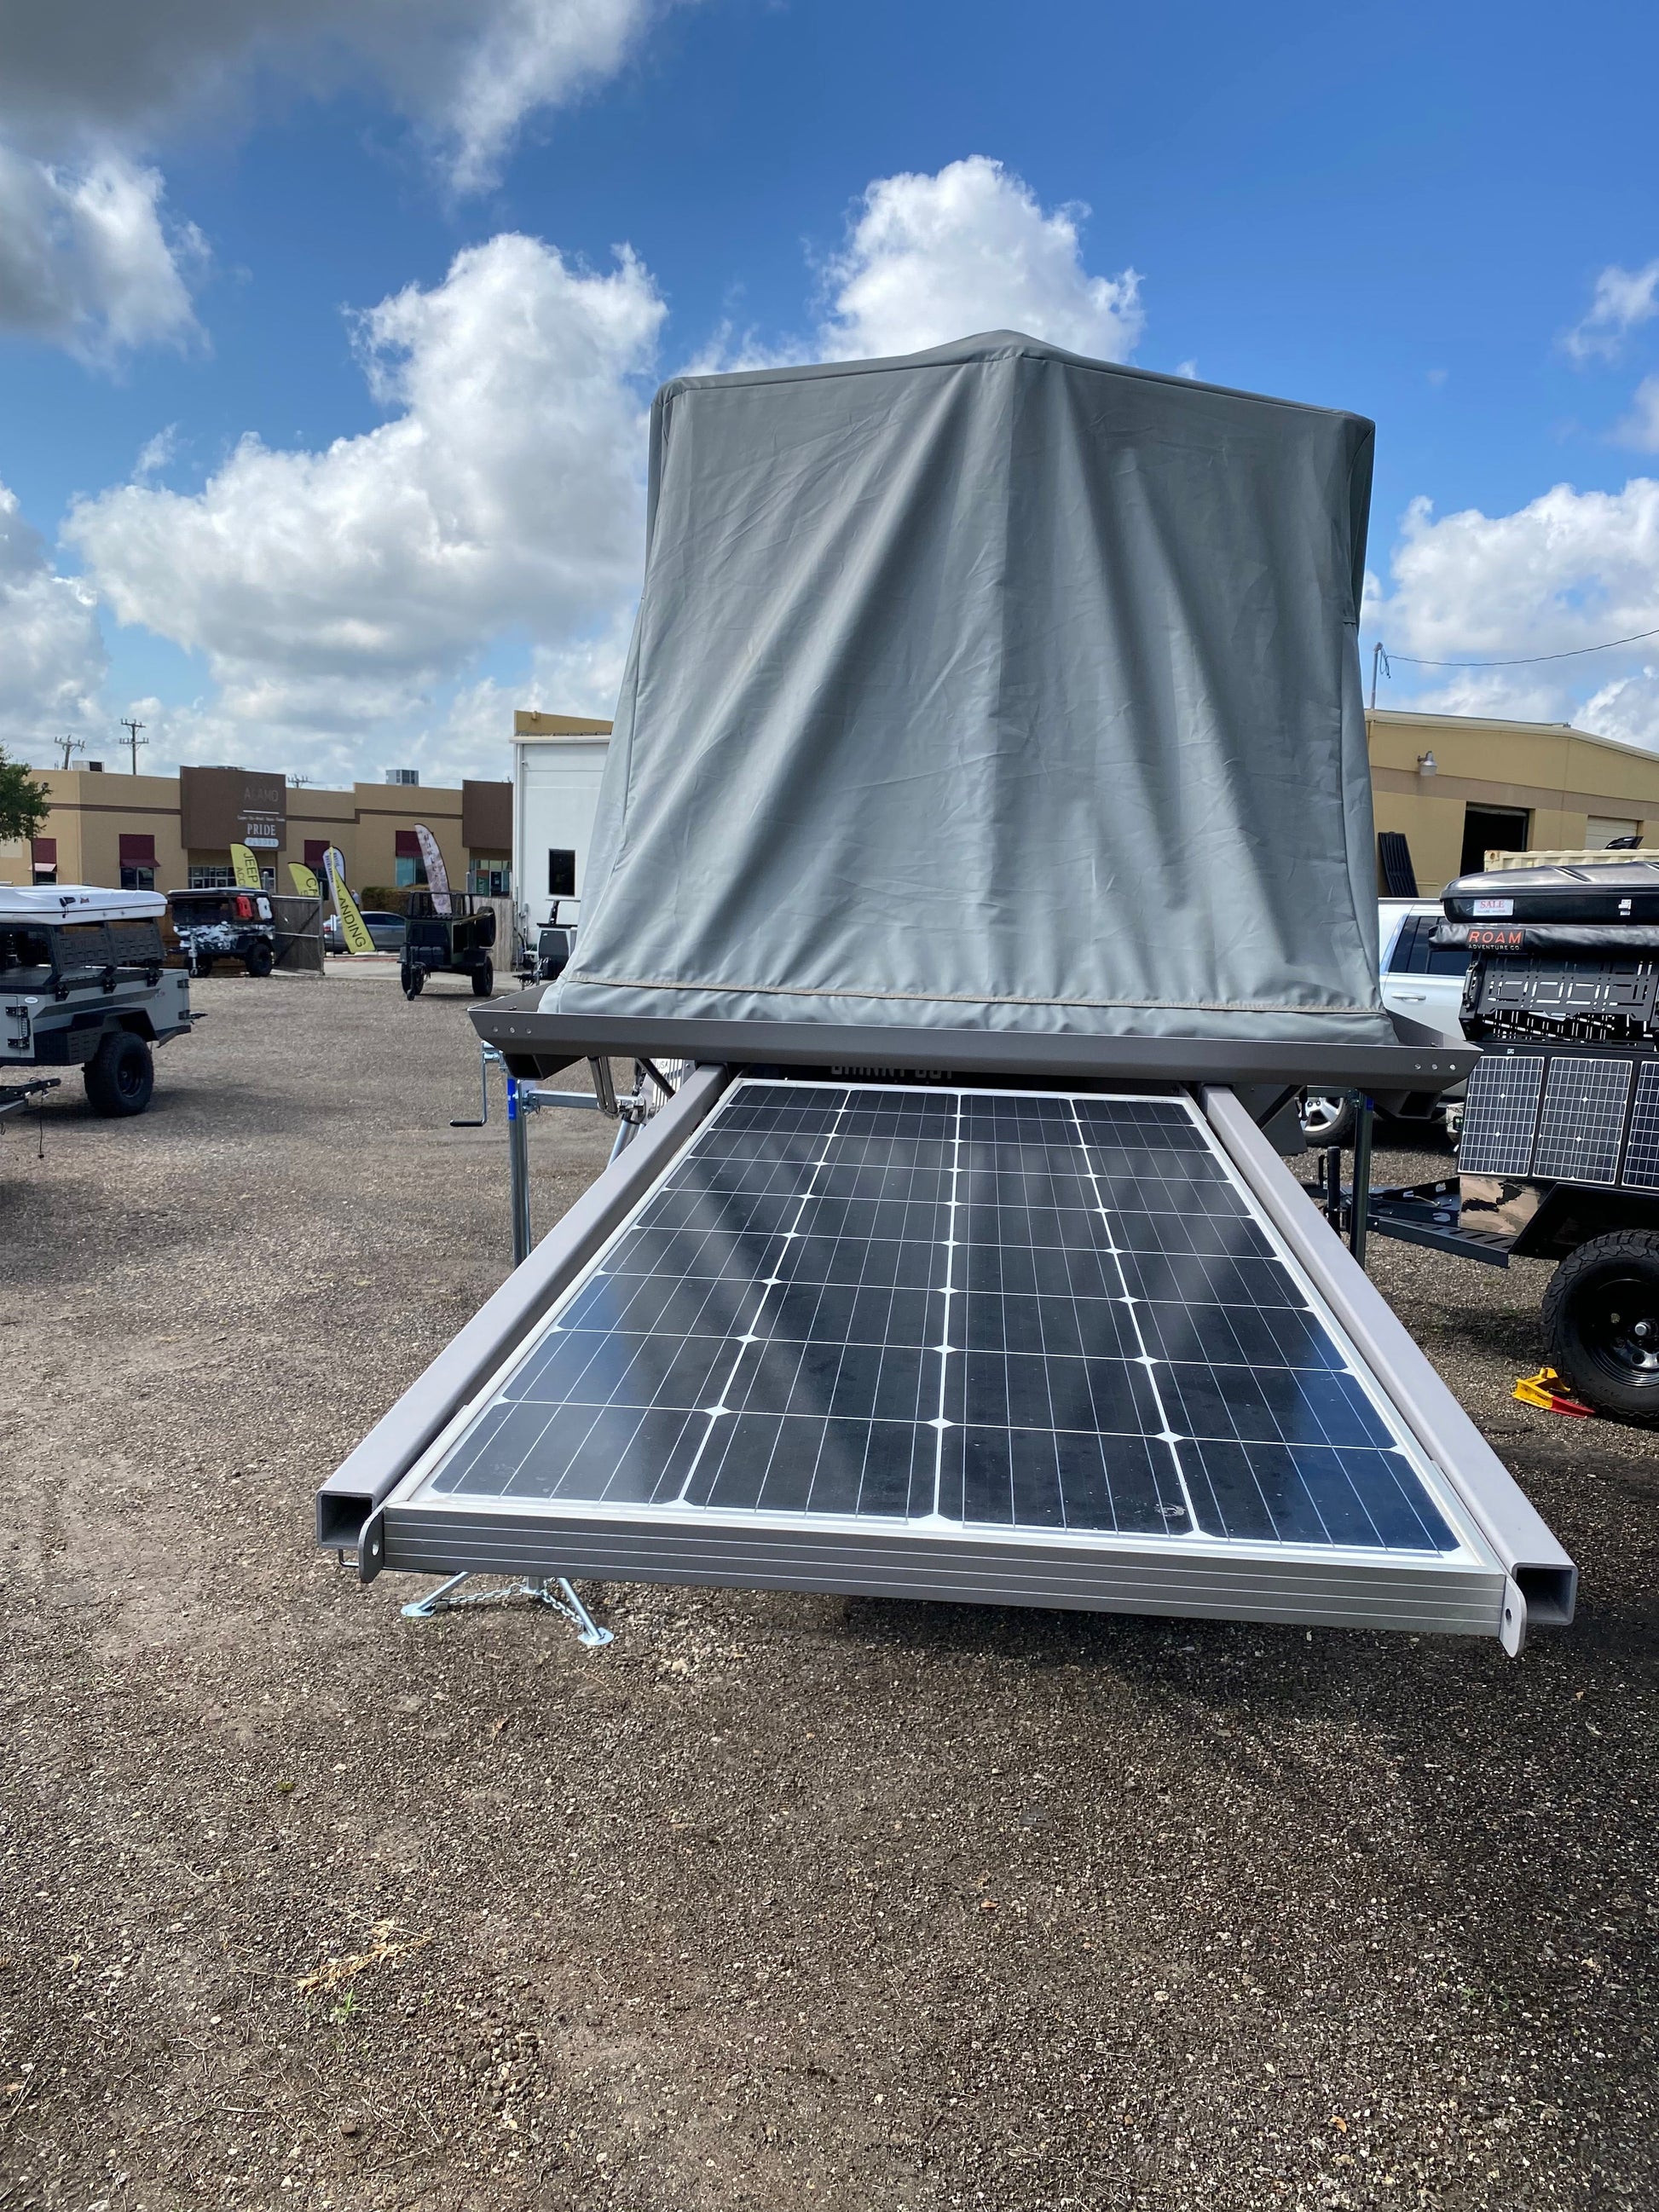 skinny guy truck bed all weather campers kit n kaboodle with outdoor kitchen and solar for sale near kerrville boerne texas at hawkes outdoors 2102512882